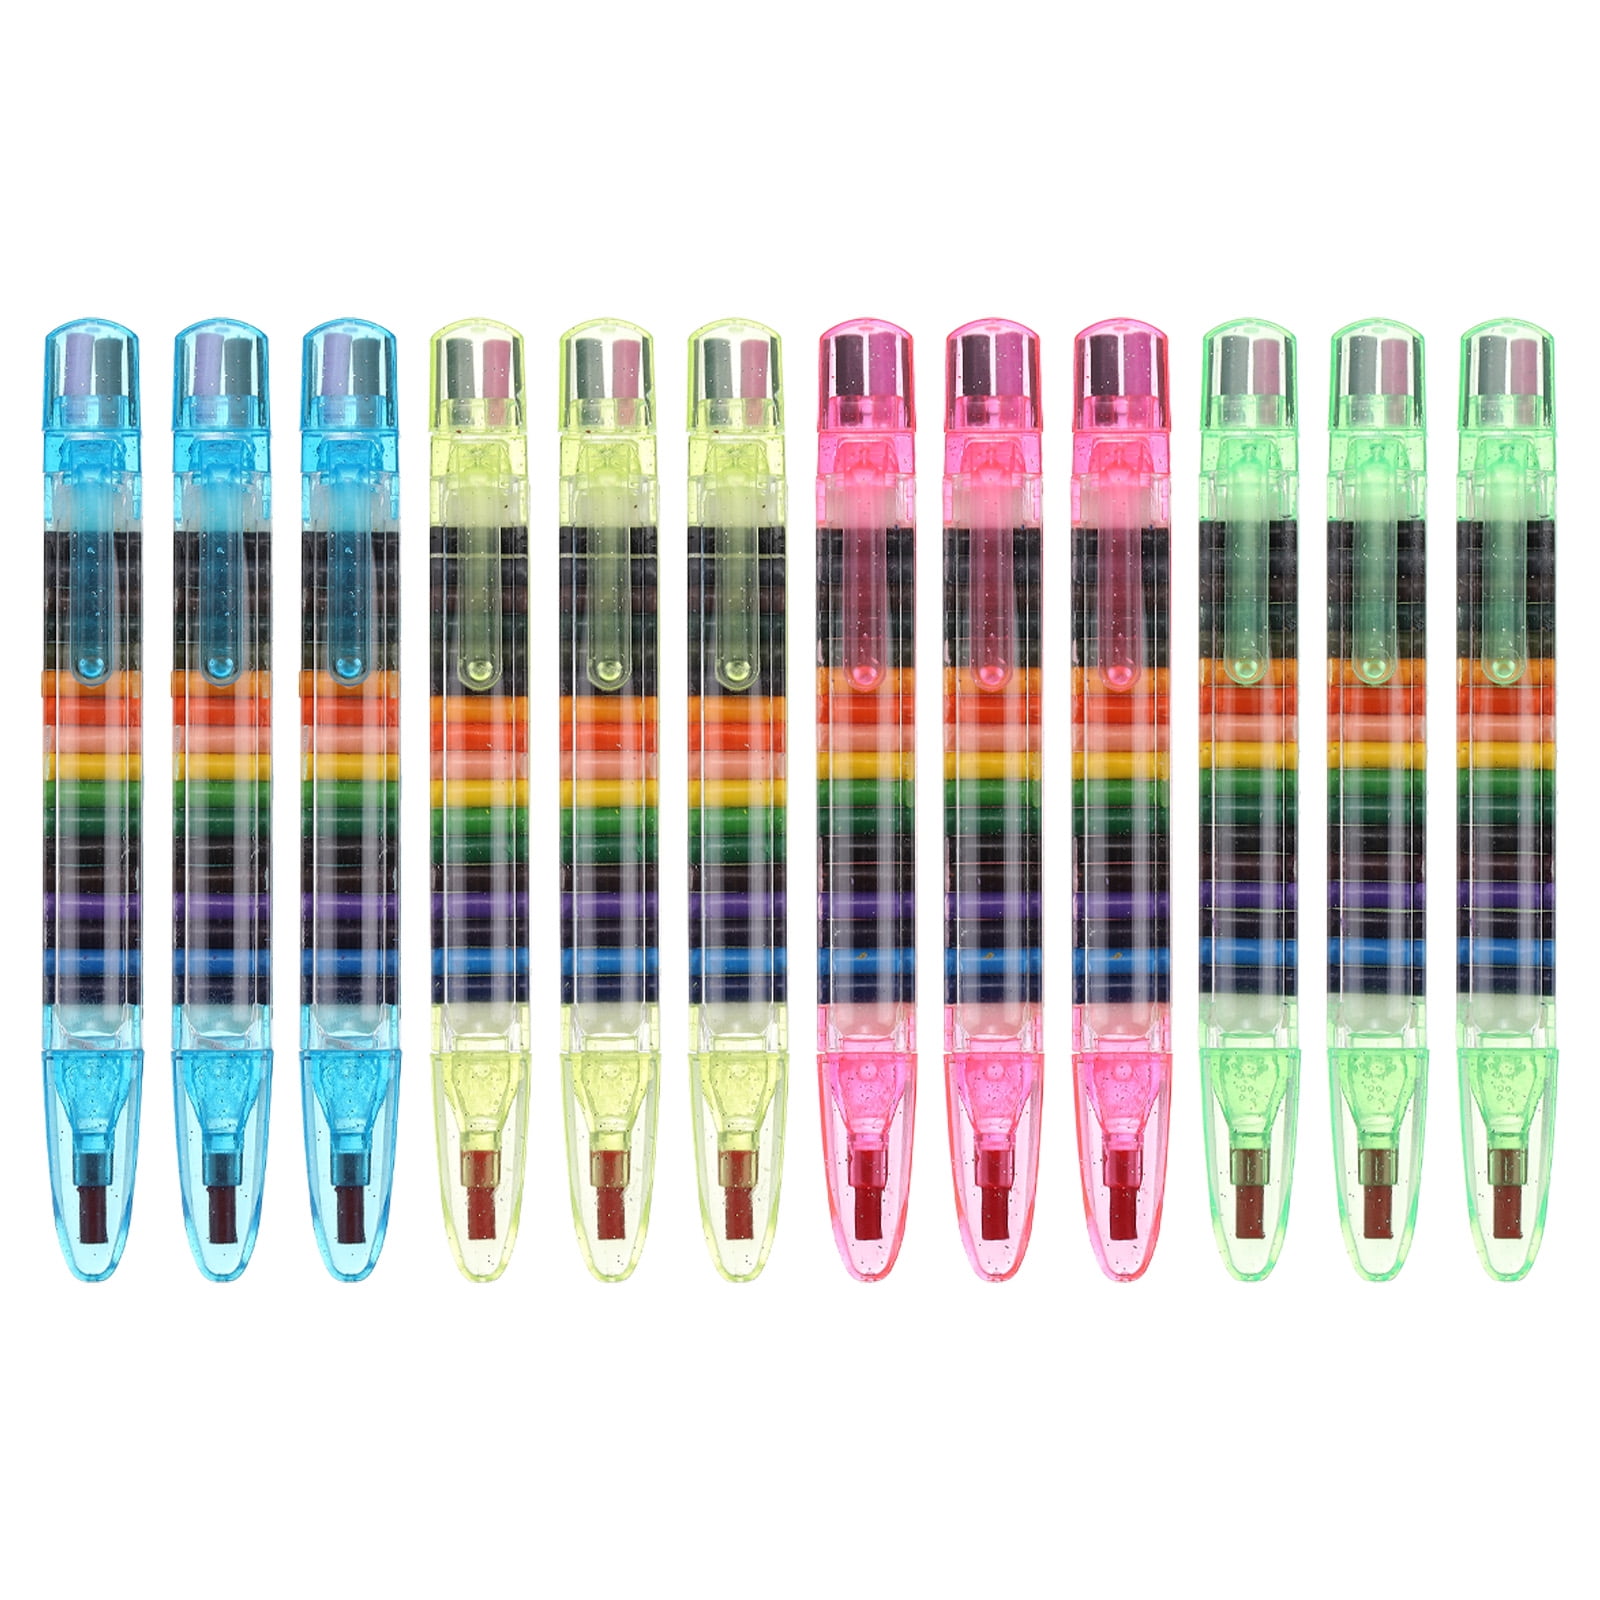 HUJI Stacking Buildable 8 Colors Crayons Set, Connect Stack and Build HJ361_24